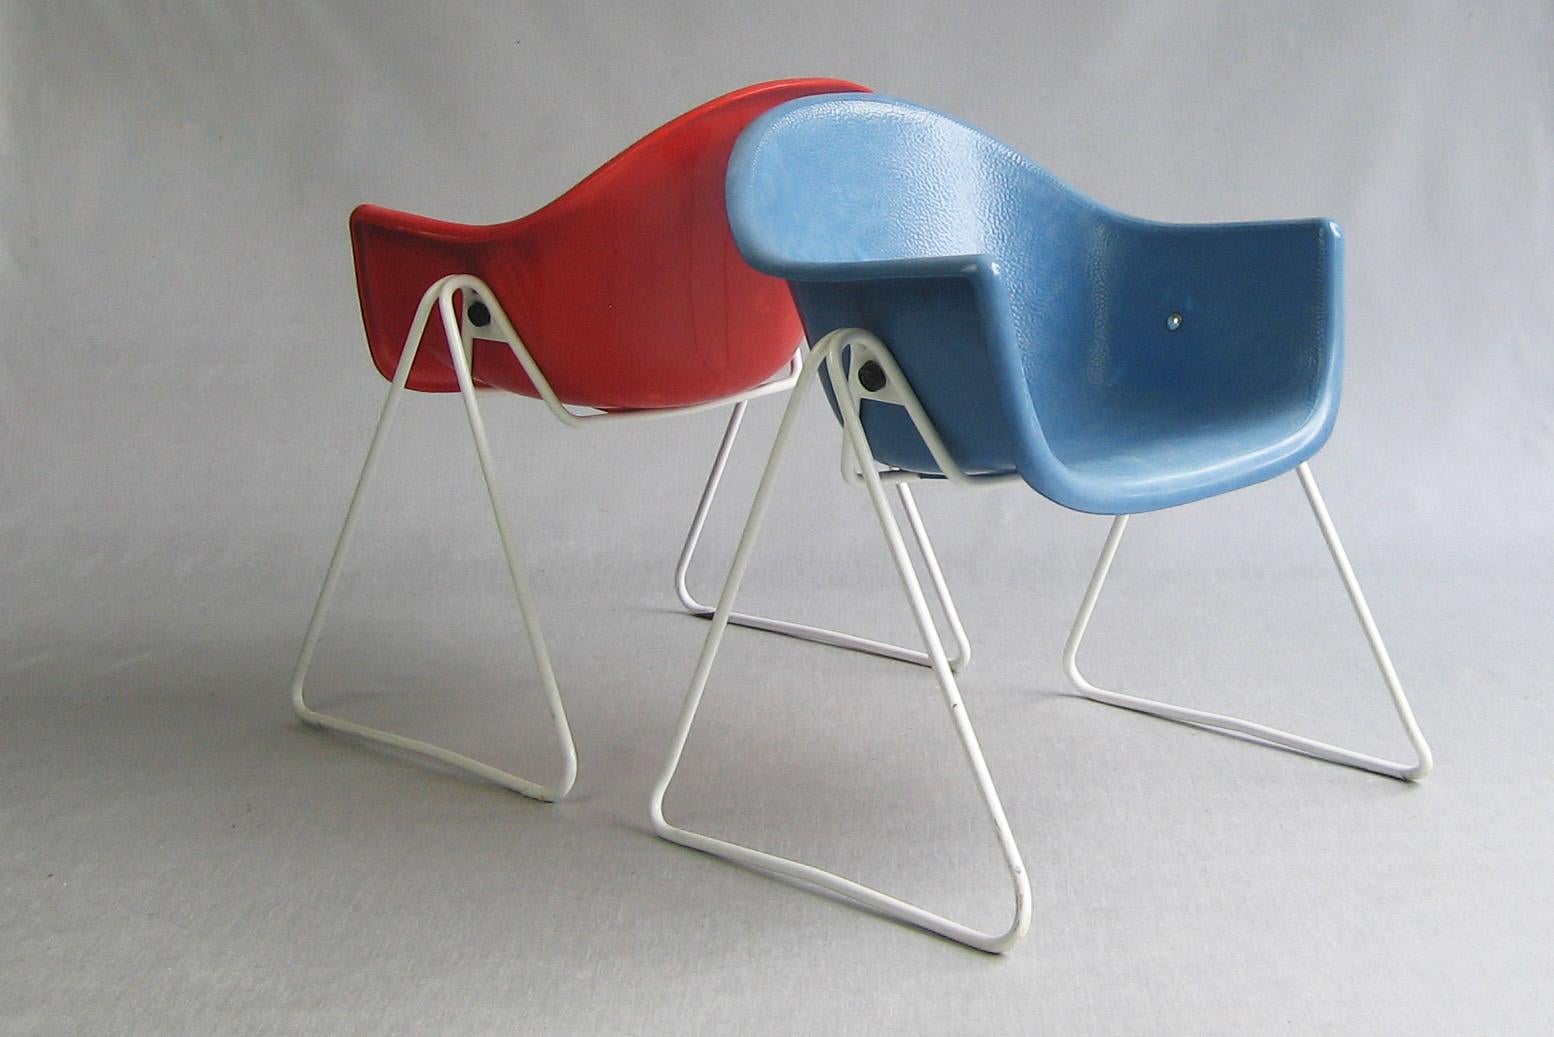 Pair of Walter Papst kids chairs, Wilkhahn, Germany 1961 - 1968 For Sale 5